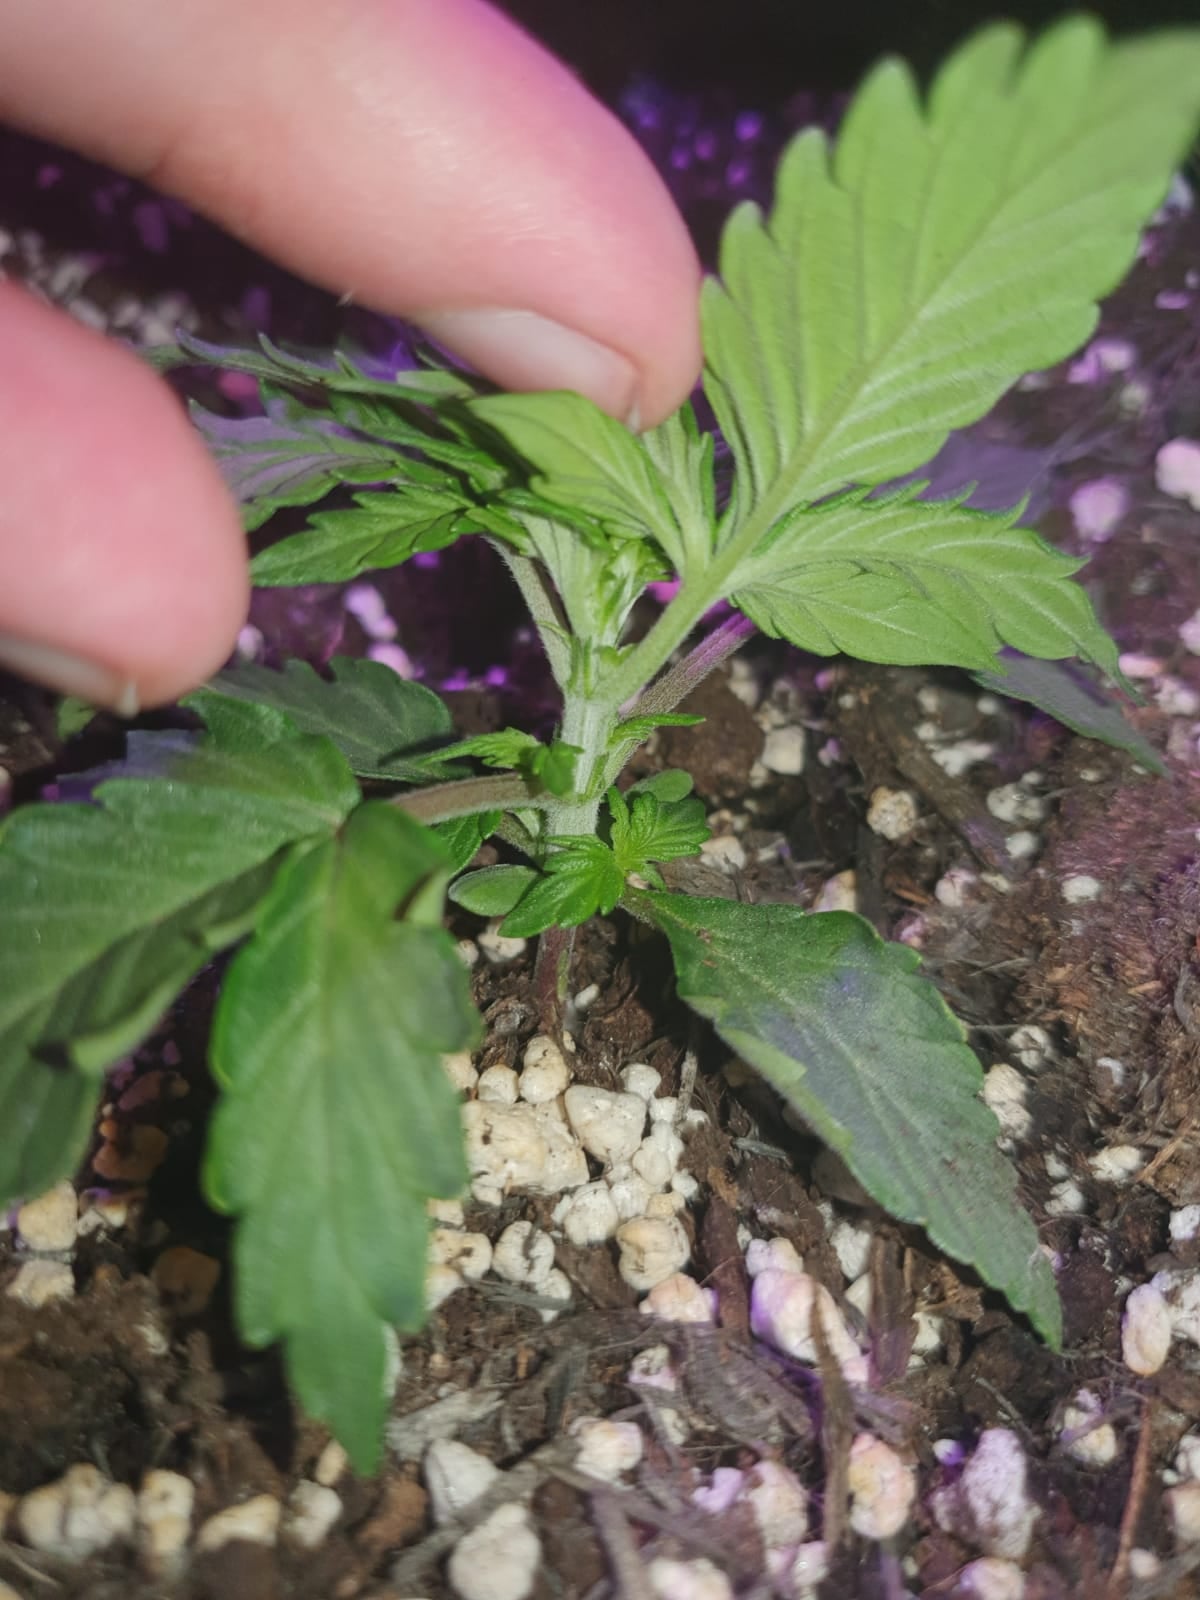 r/SpaceBuckets - What could be wrong with my plants?